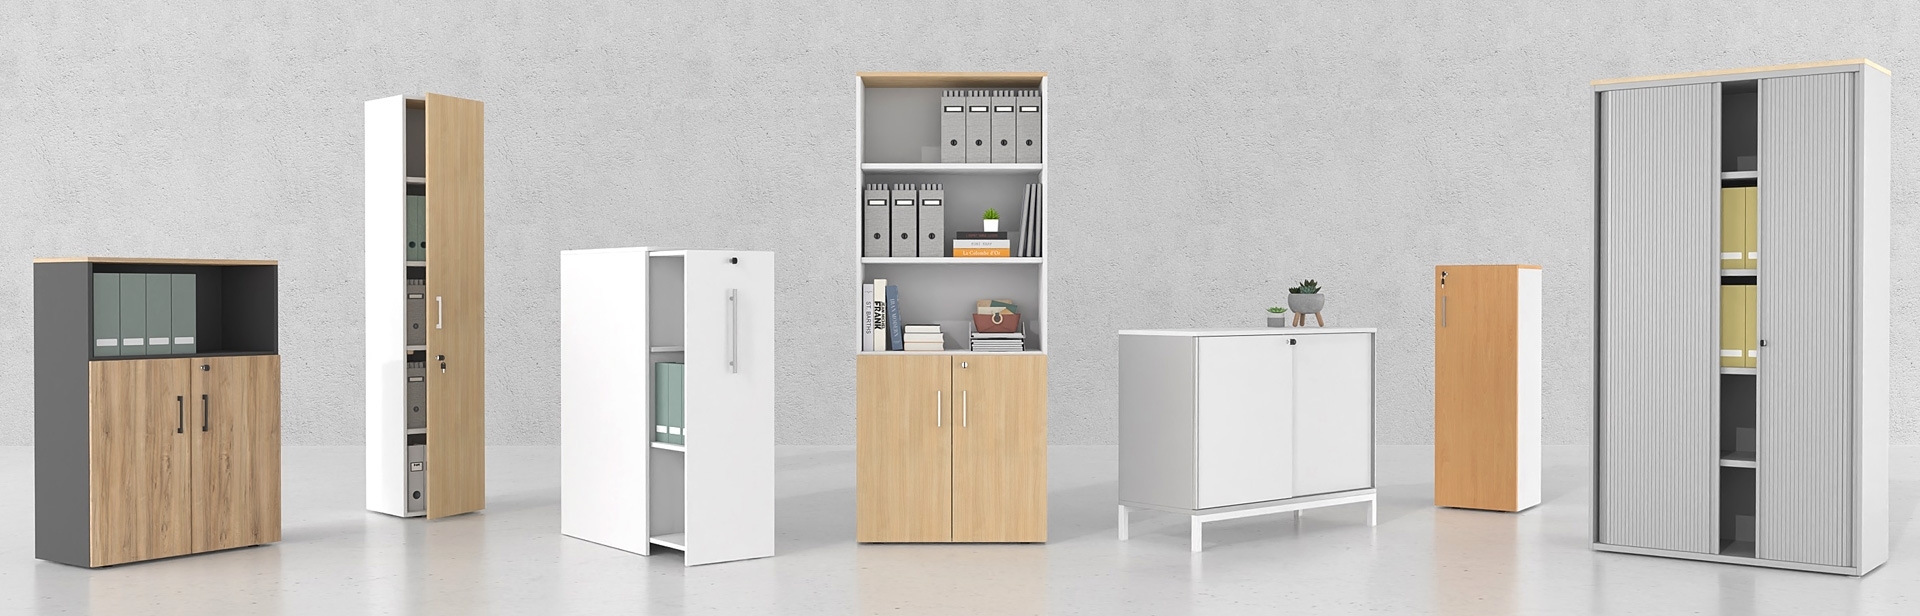 Office Cabinets, Wardrobes & Office Shelves | Dromeas